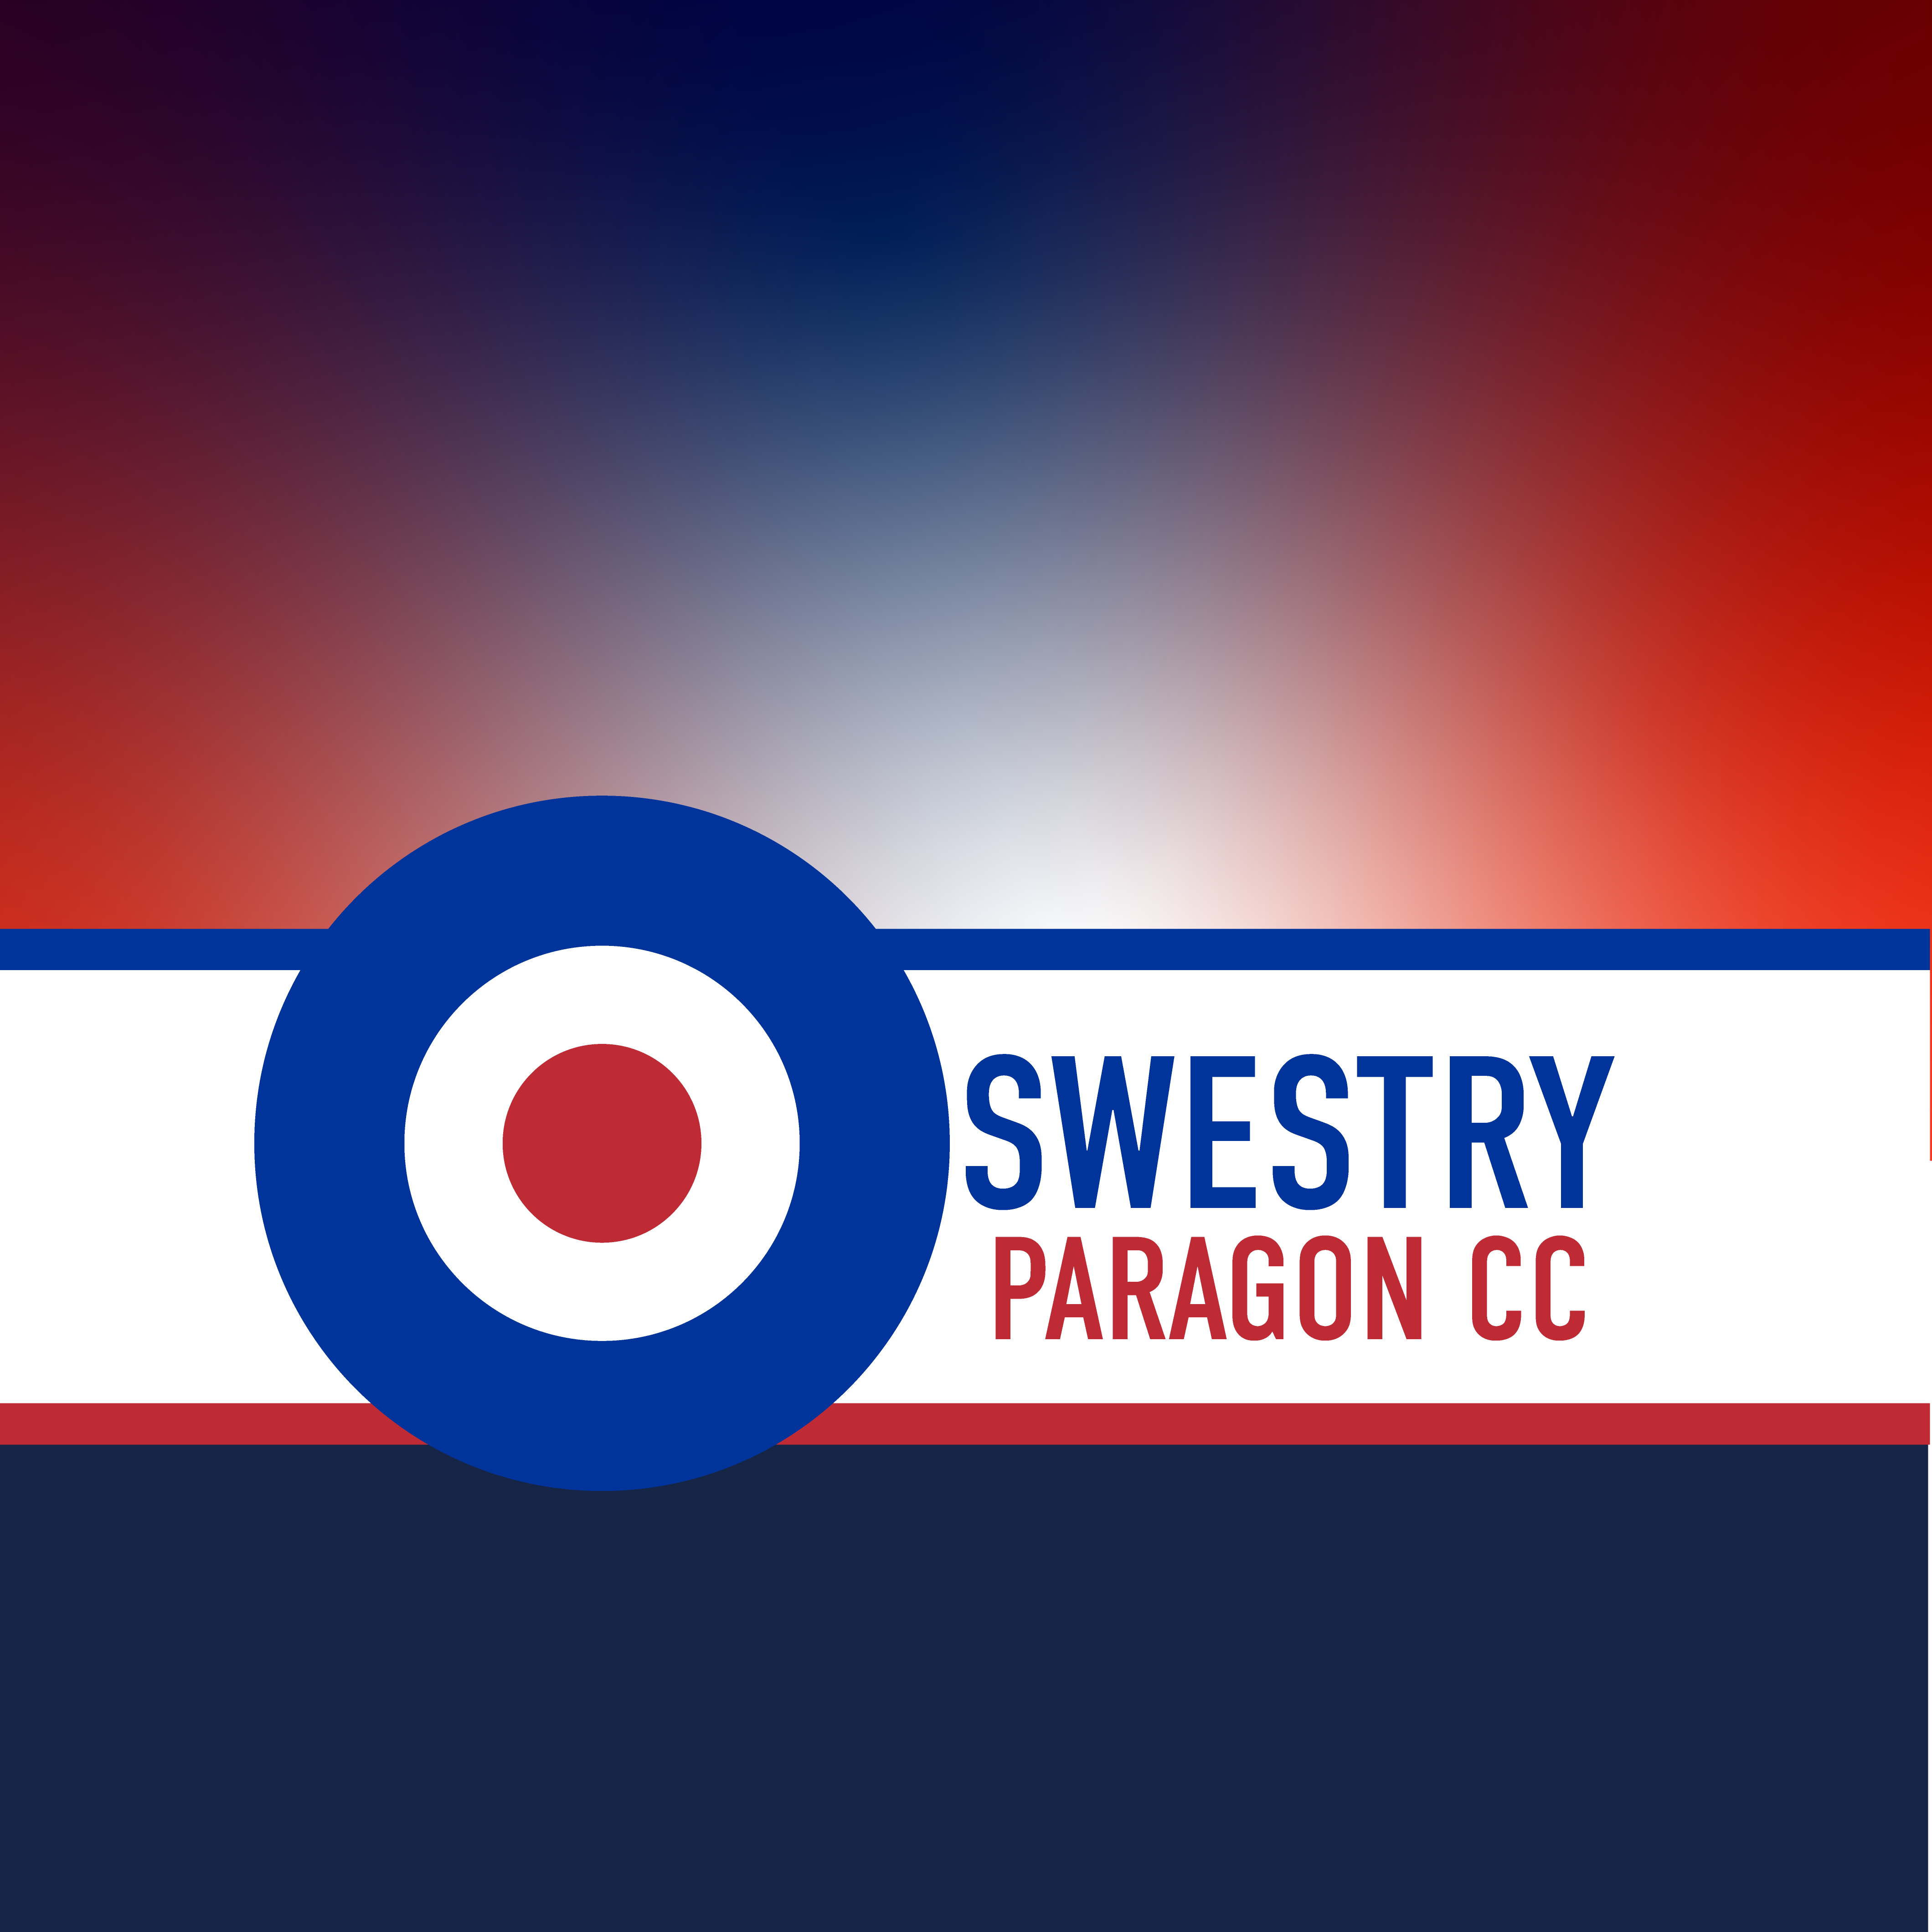 Club Image for OSWESTRY